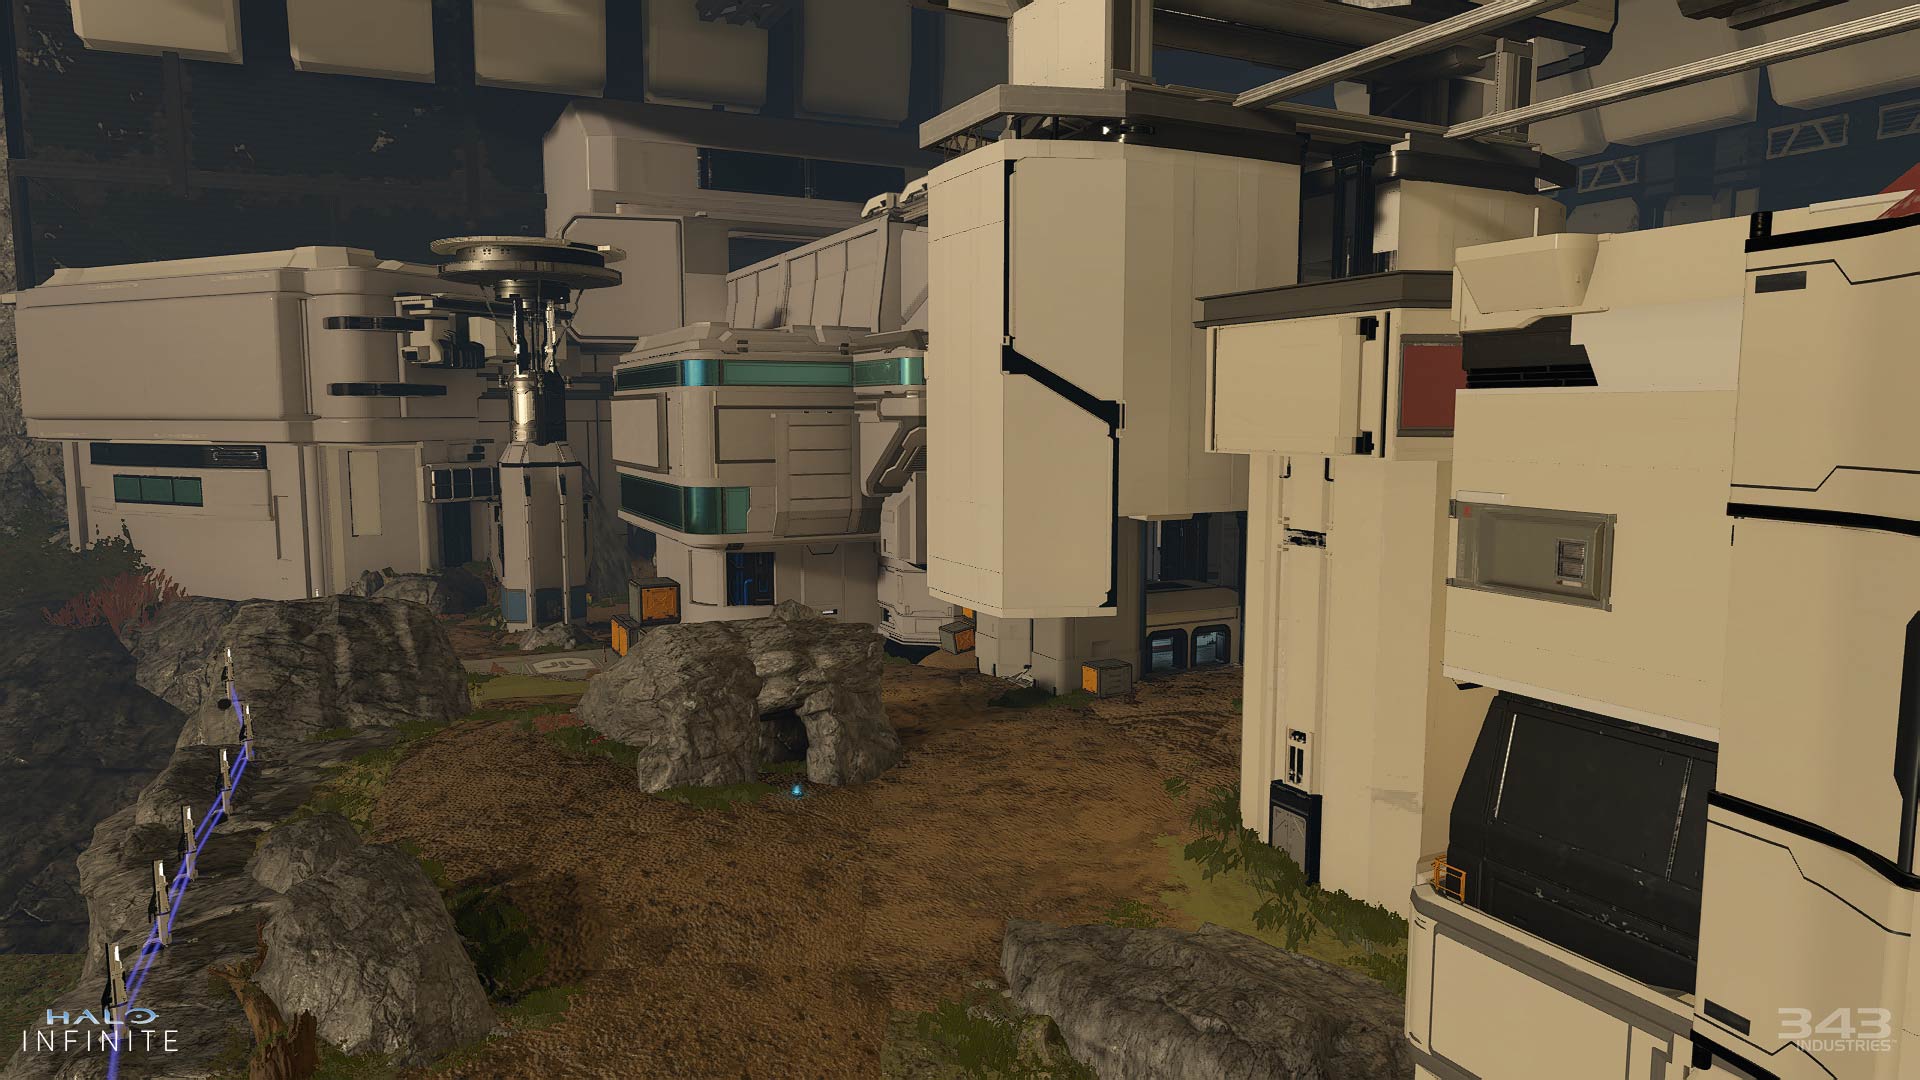 Halo 4's map "Harvest" recreated in Halo Infinite's Forge